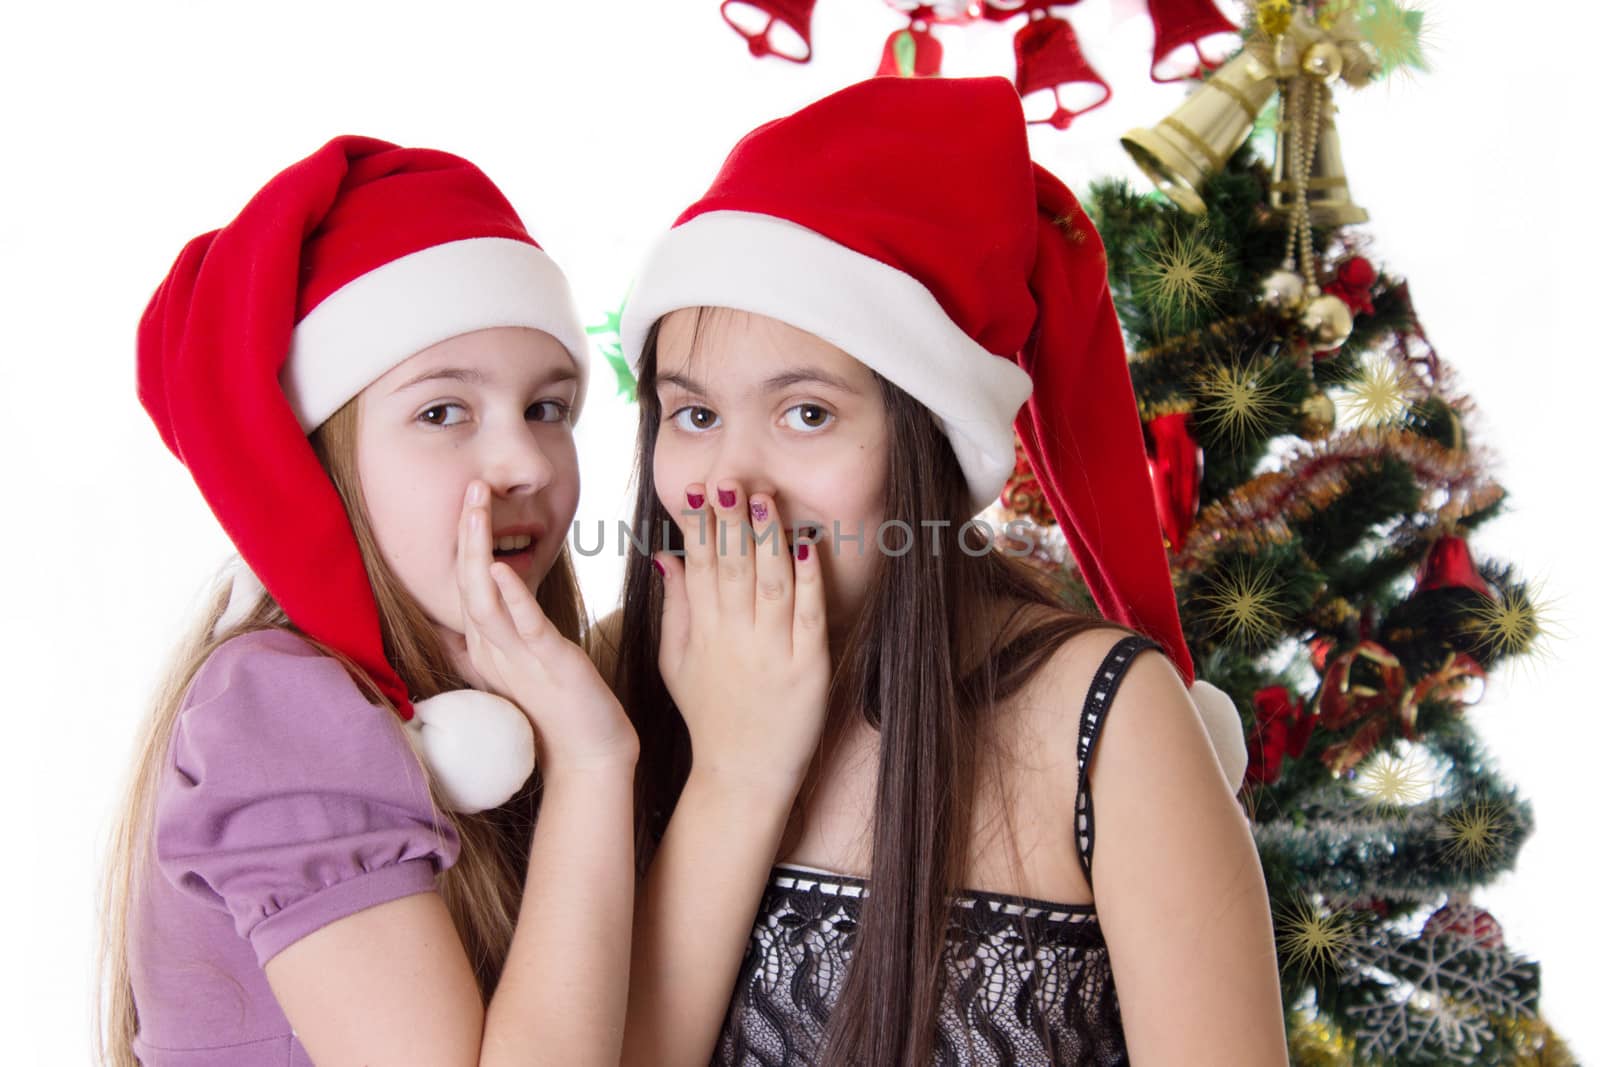 Two eleven years old girls sharing each other secrets on Christmas Eve